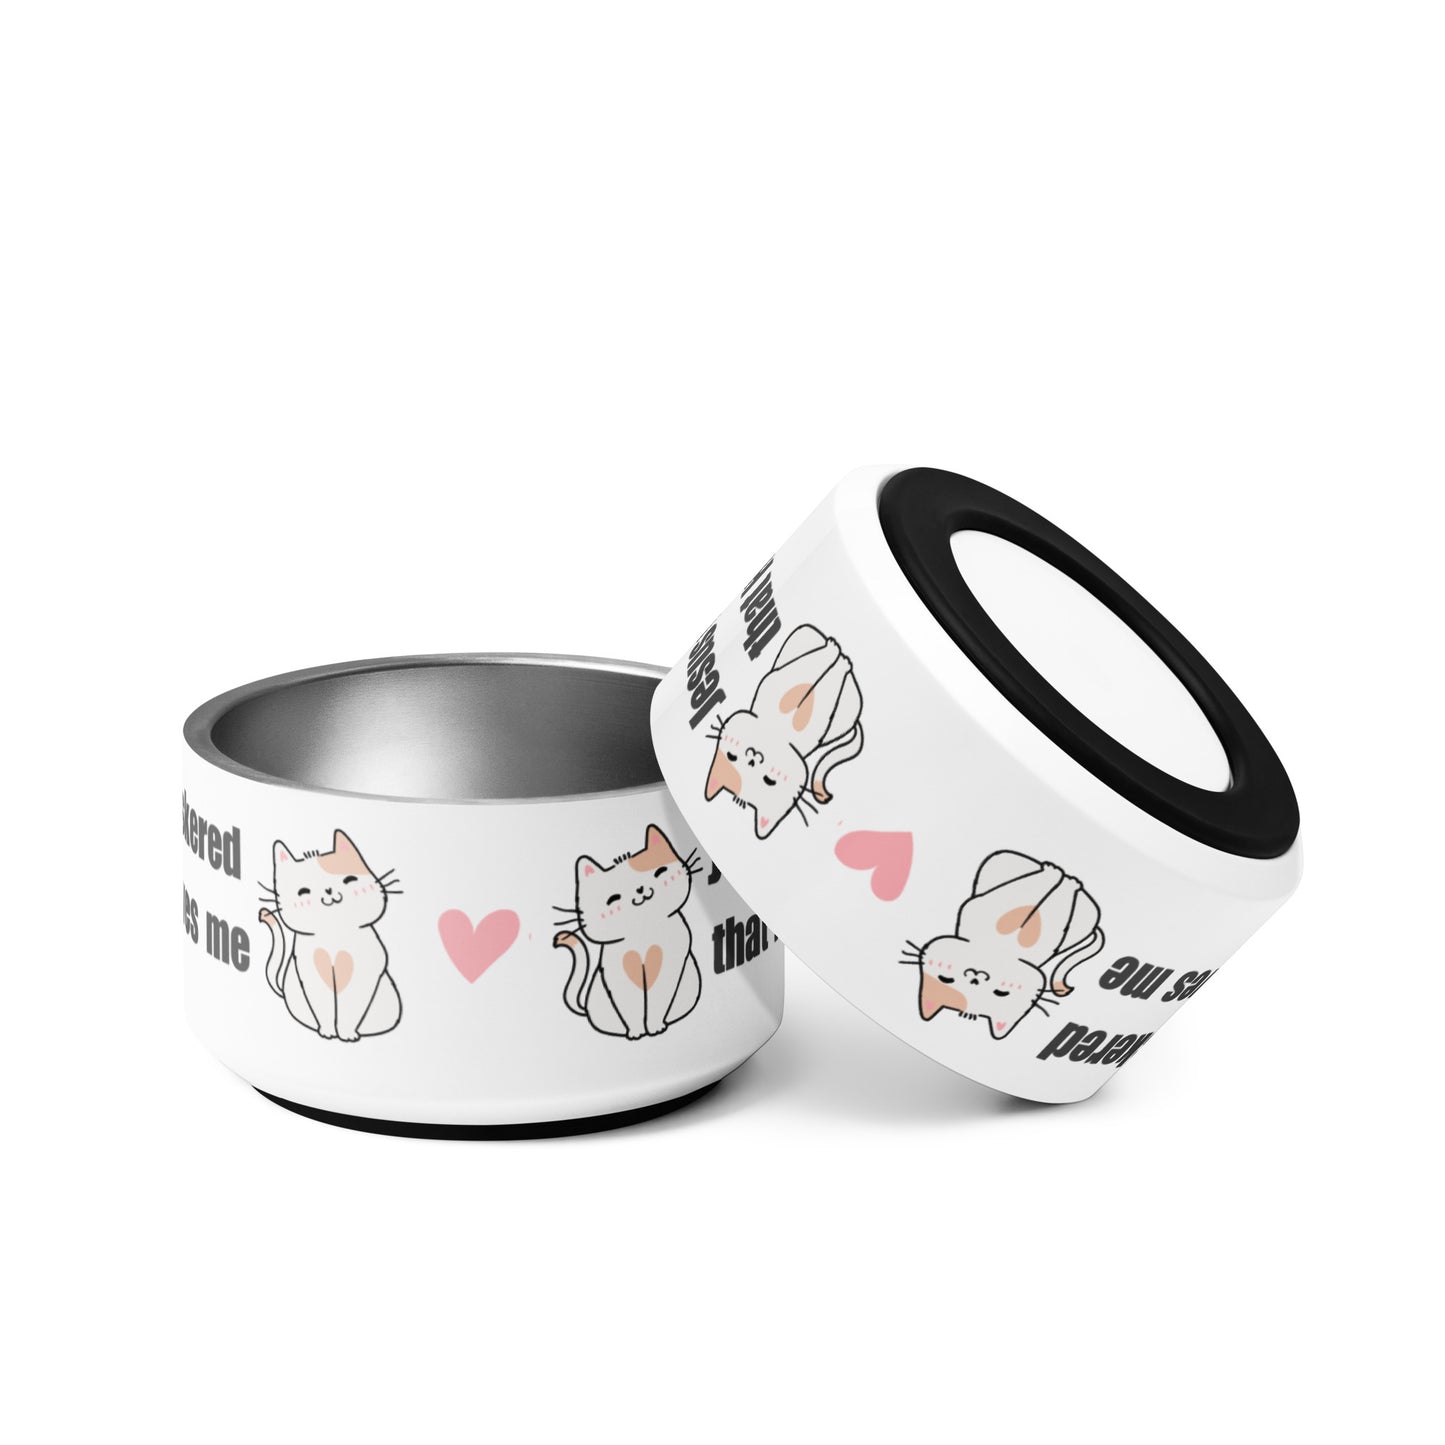 Two stainless steel cat dishes, identical on a white background, but one dish is turned upside down and resting on the first to show the black rubber bottom on the pet bowl. There are words and a design with cat graphics and a pink heart on the side of the dish on a white background.